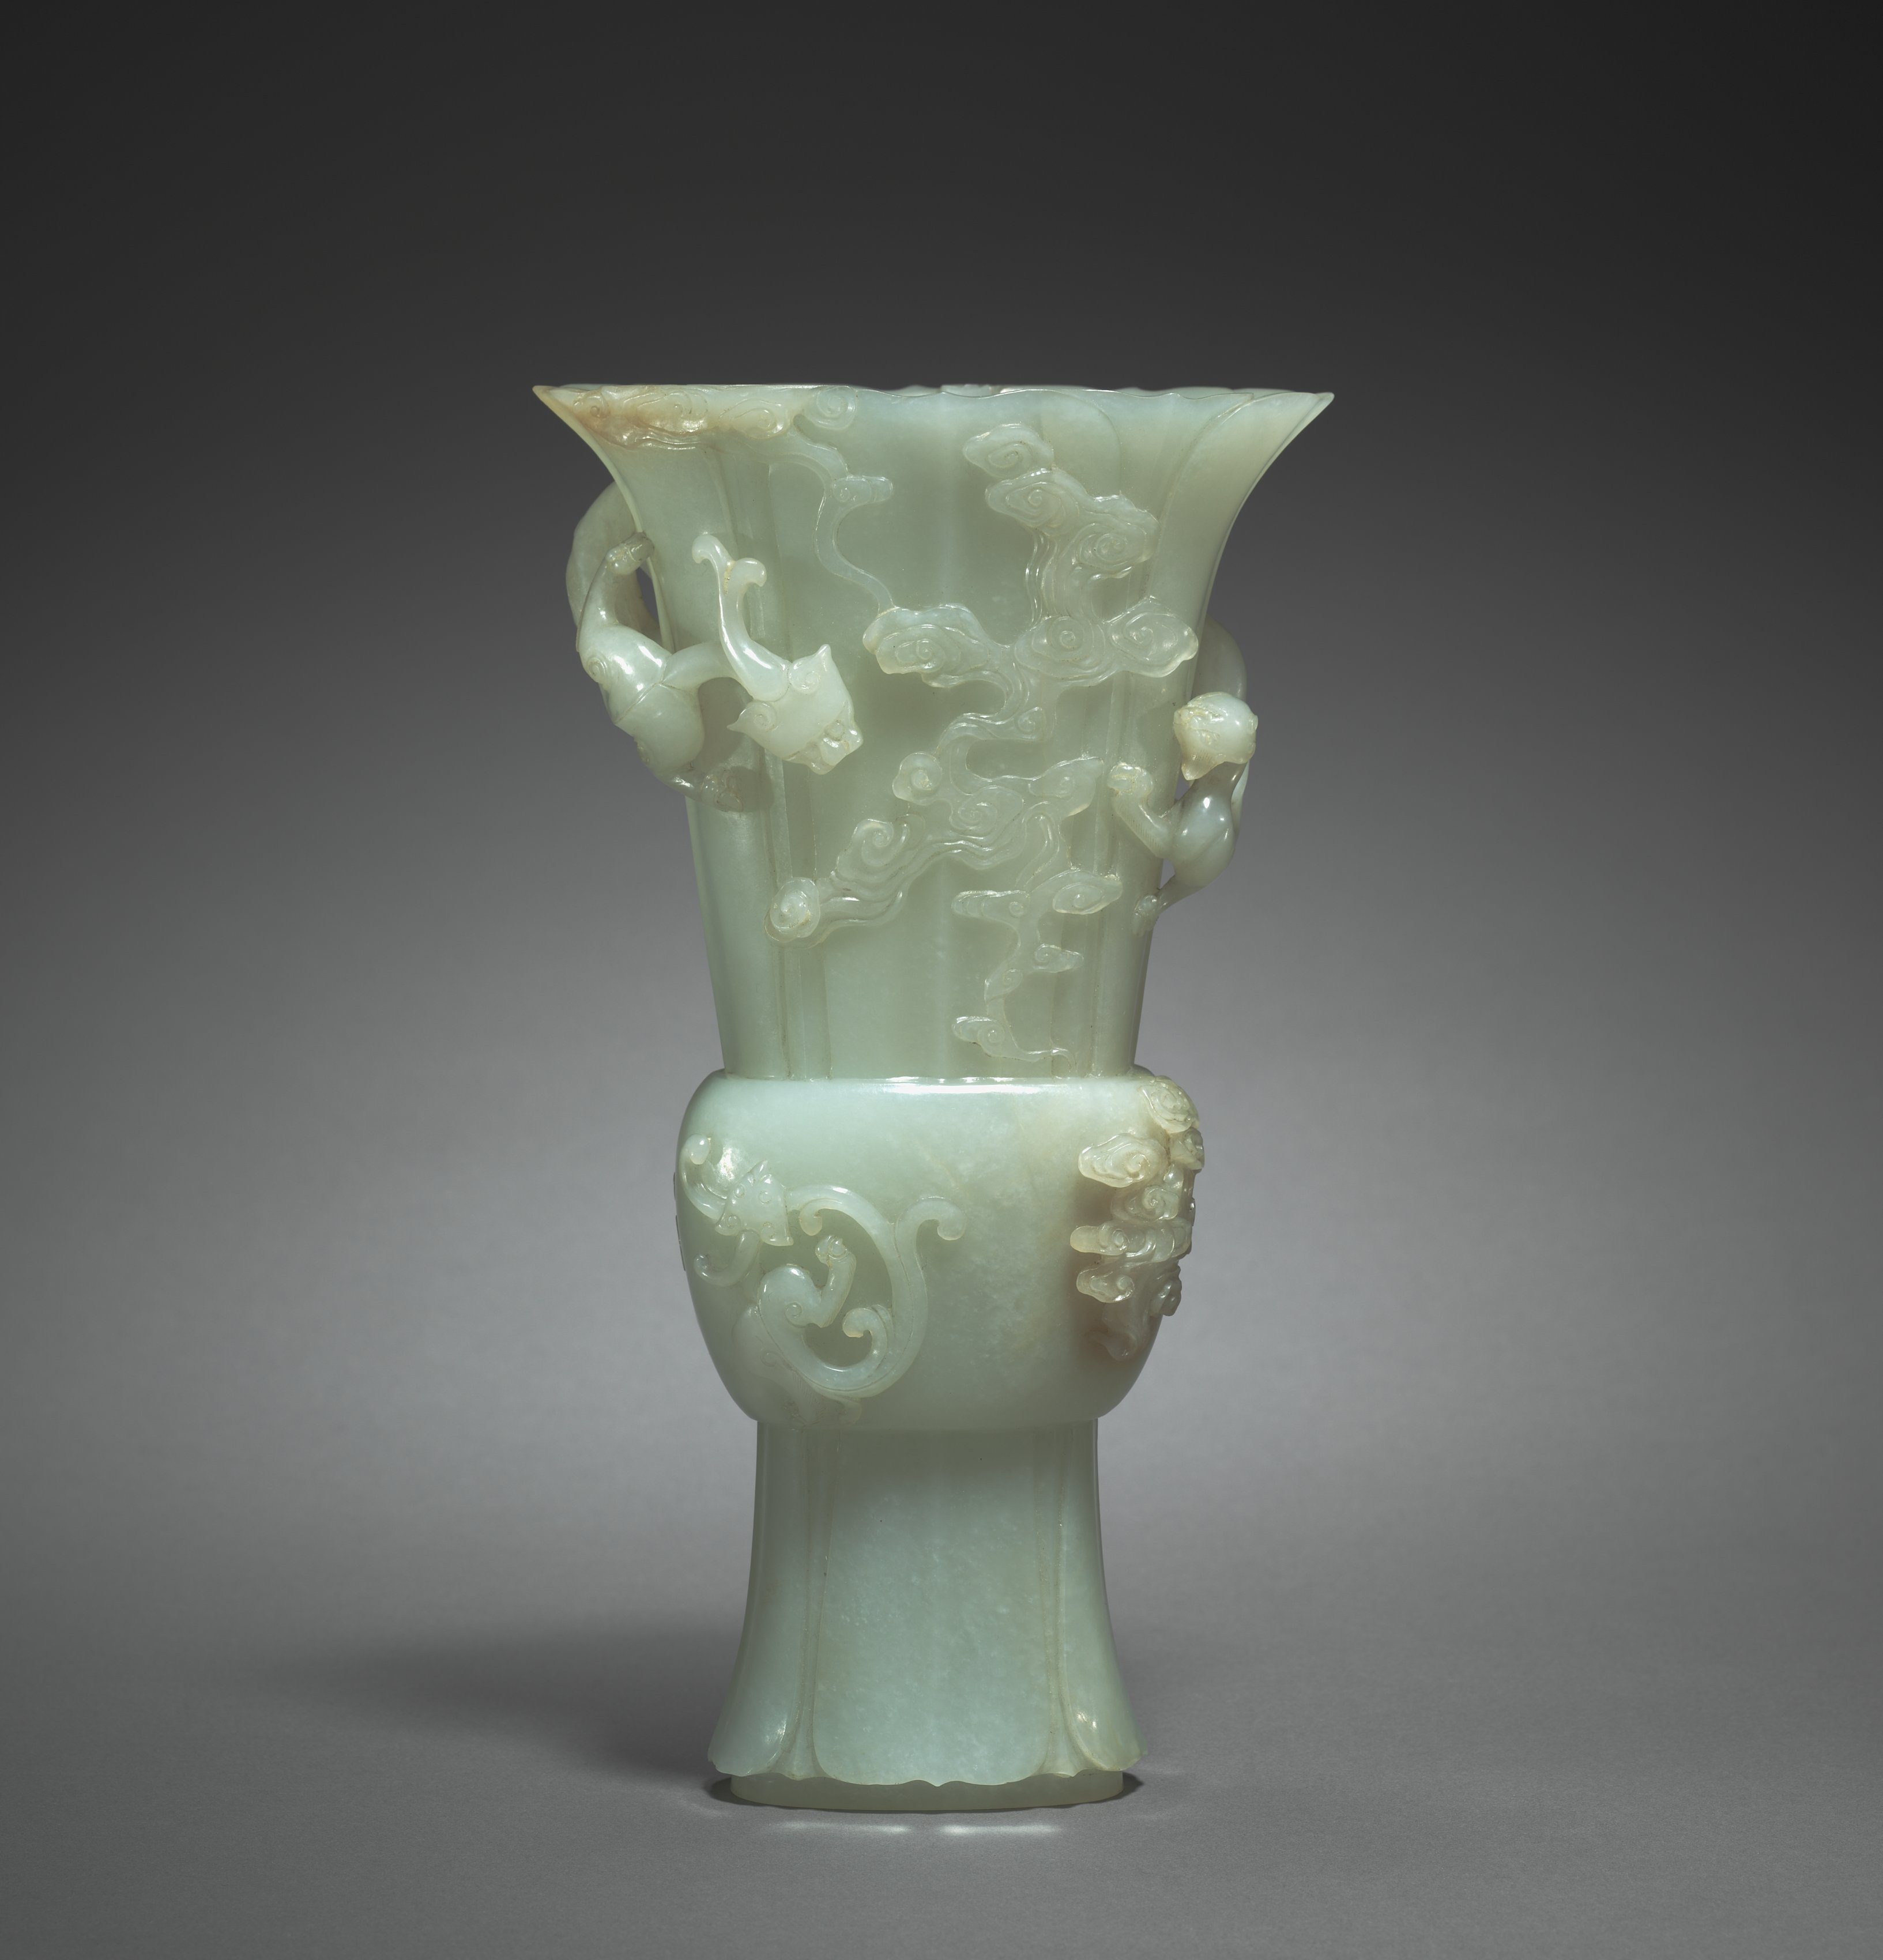 Vase in Form of Archaic Zun with Dragons in Relief